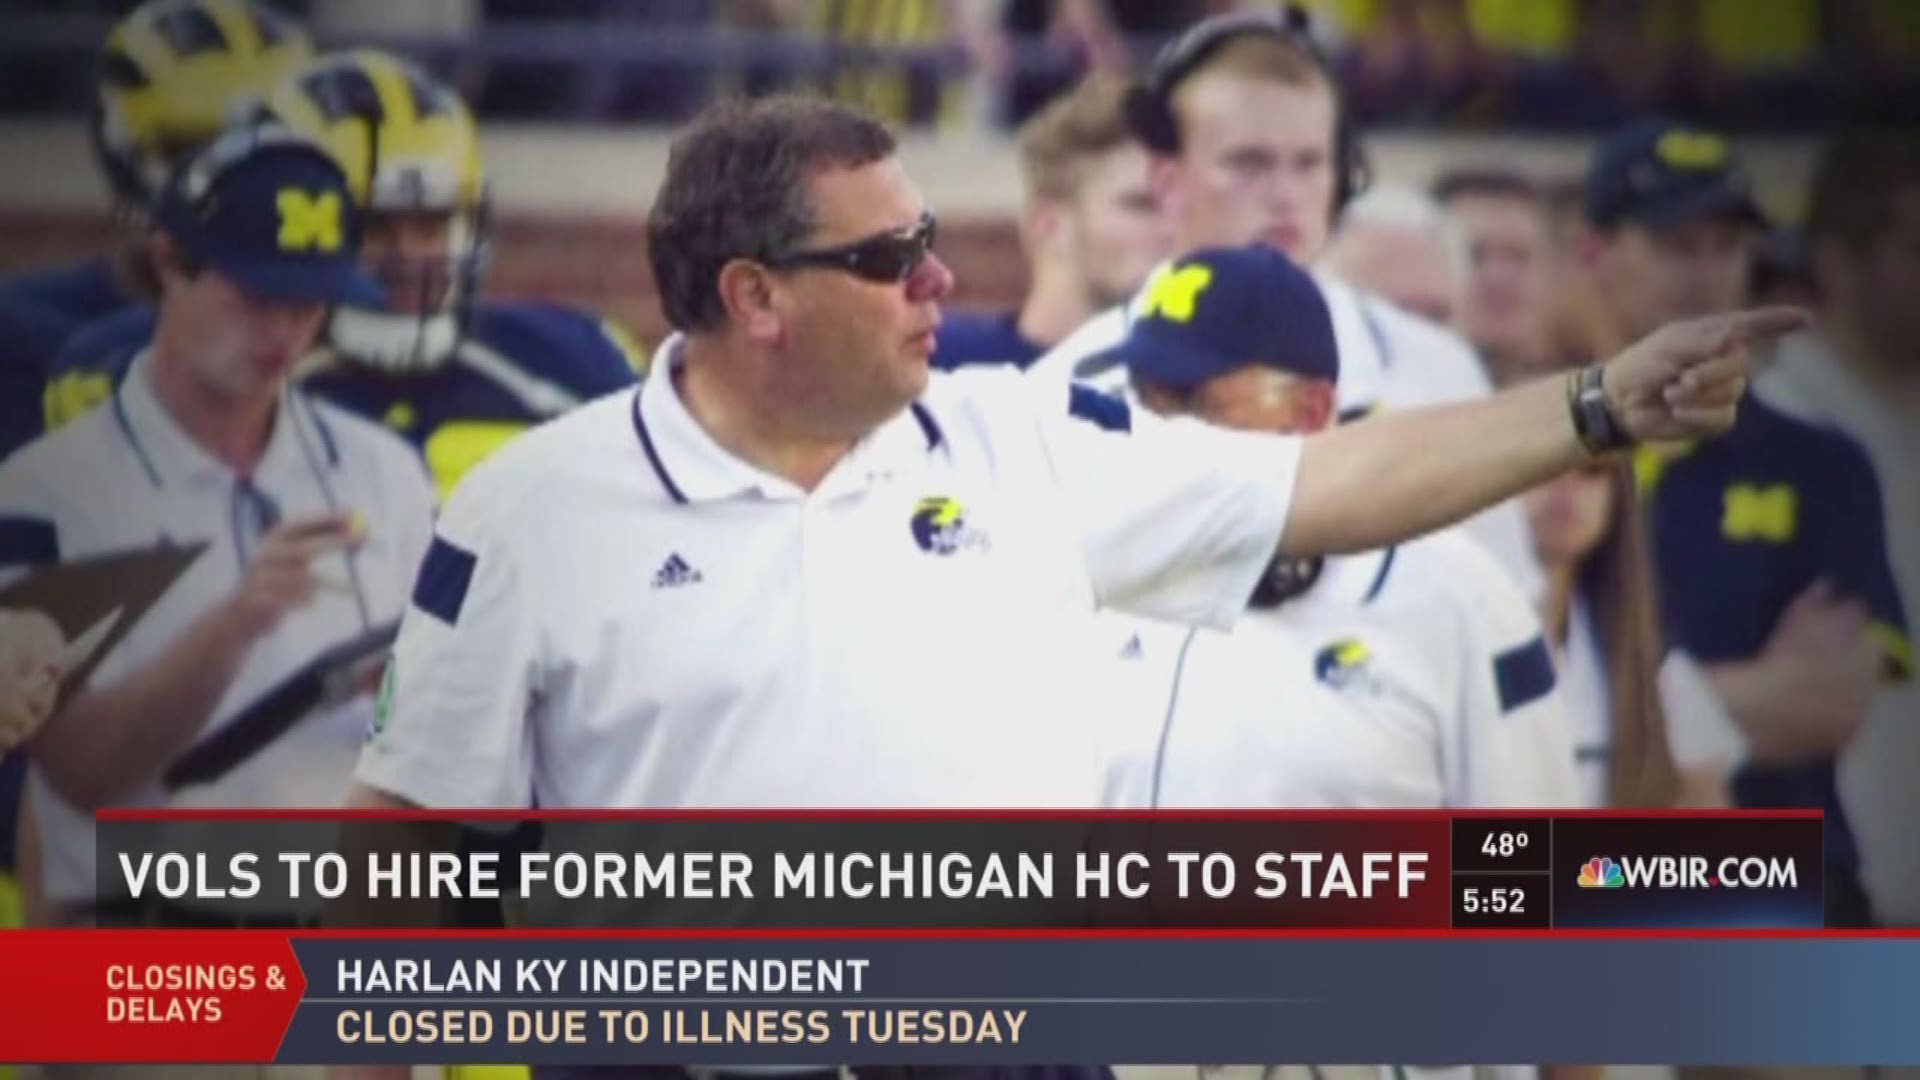 Former Michigan head coach Brady Hoke is to be hired as Tennessee's defensive line coach.